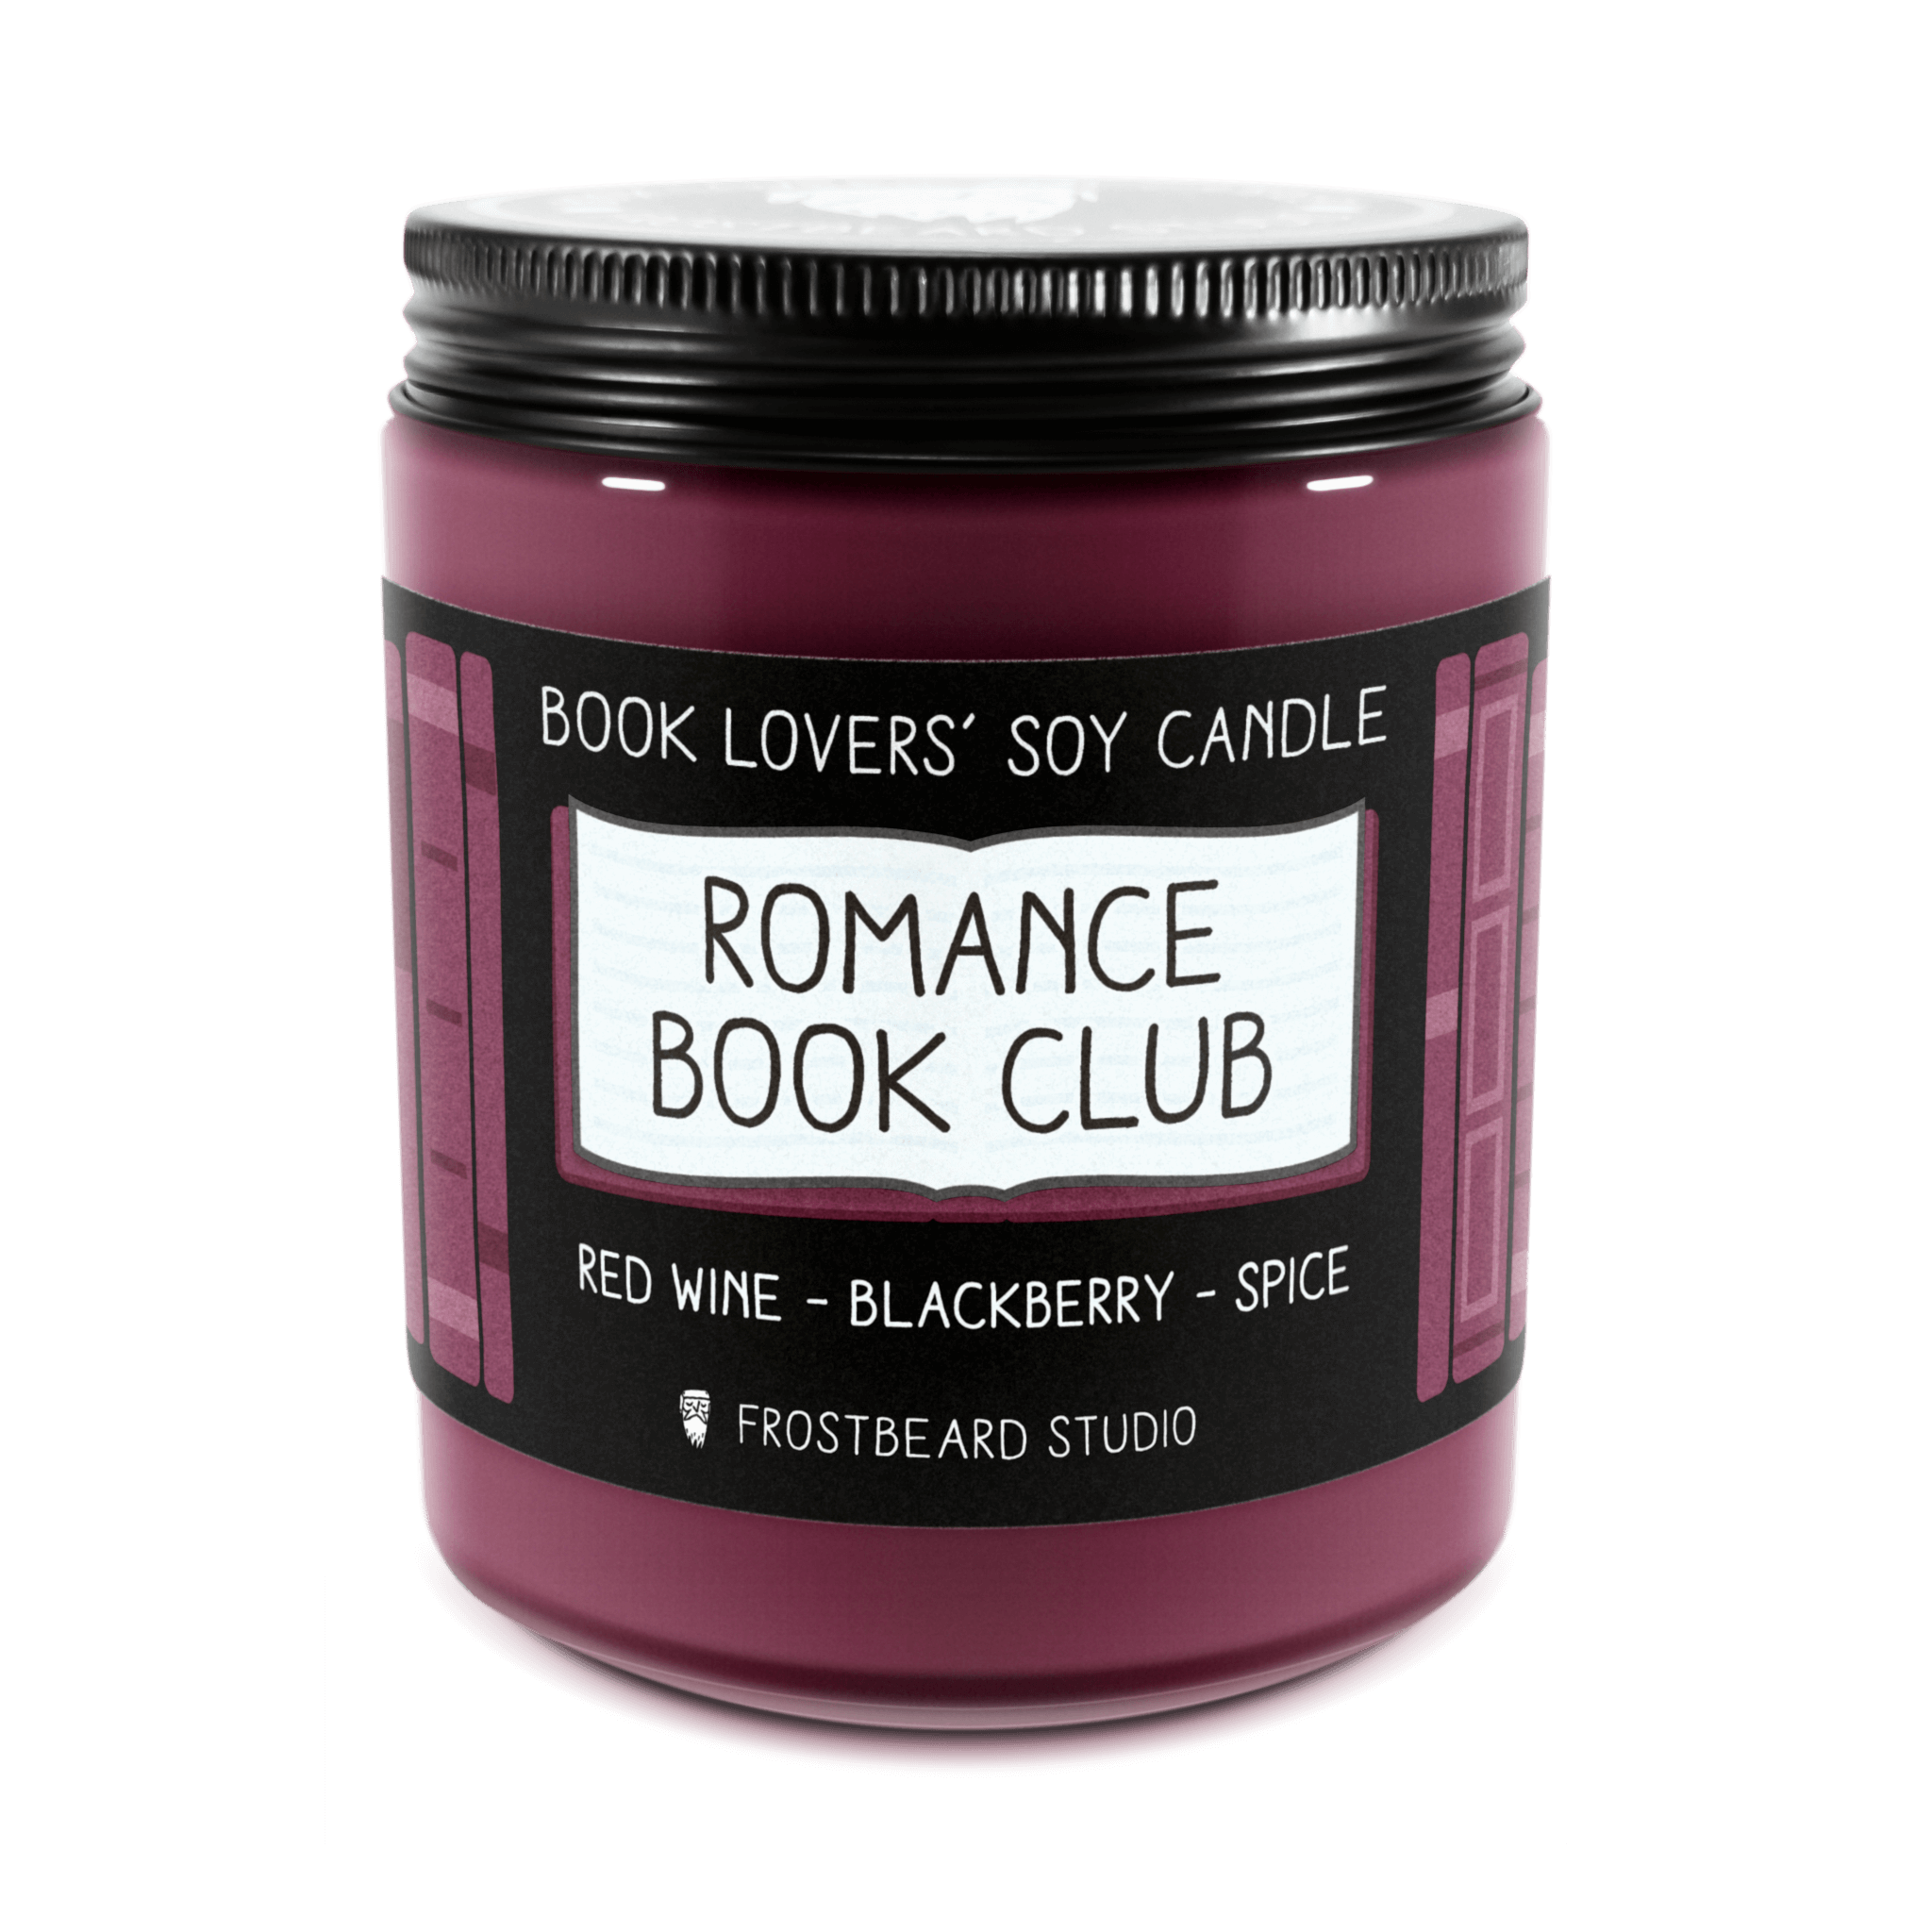 Romance Book Club︱Book Lovers' Soy Candle︱Frostbeard Studio